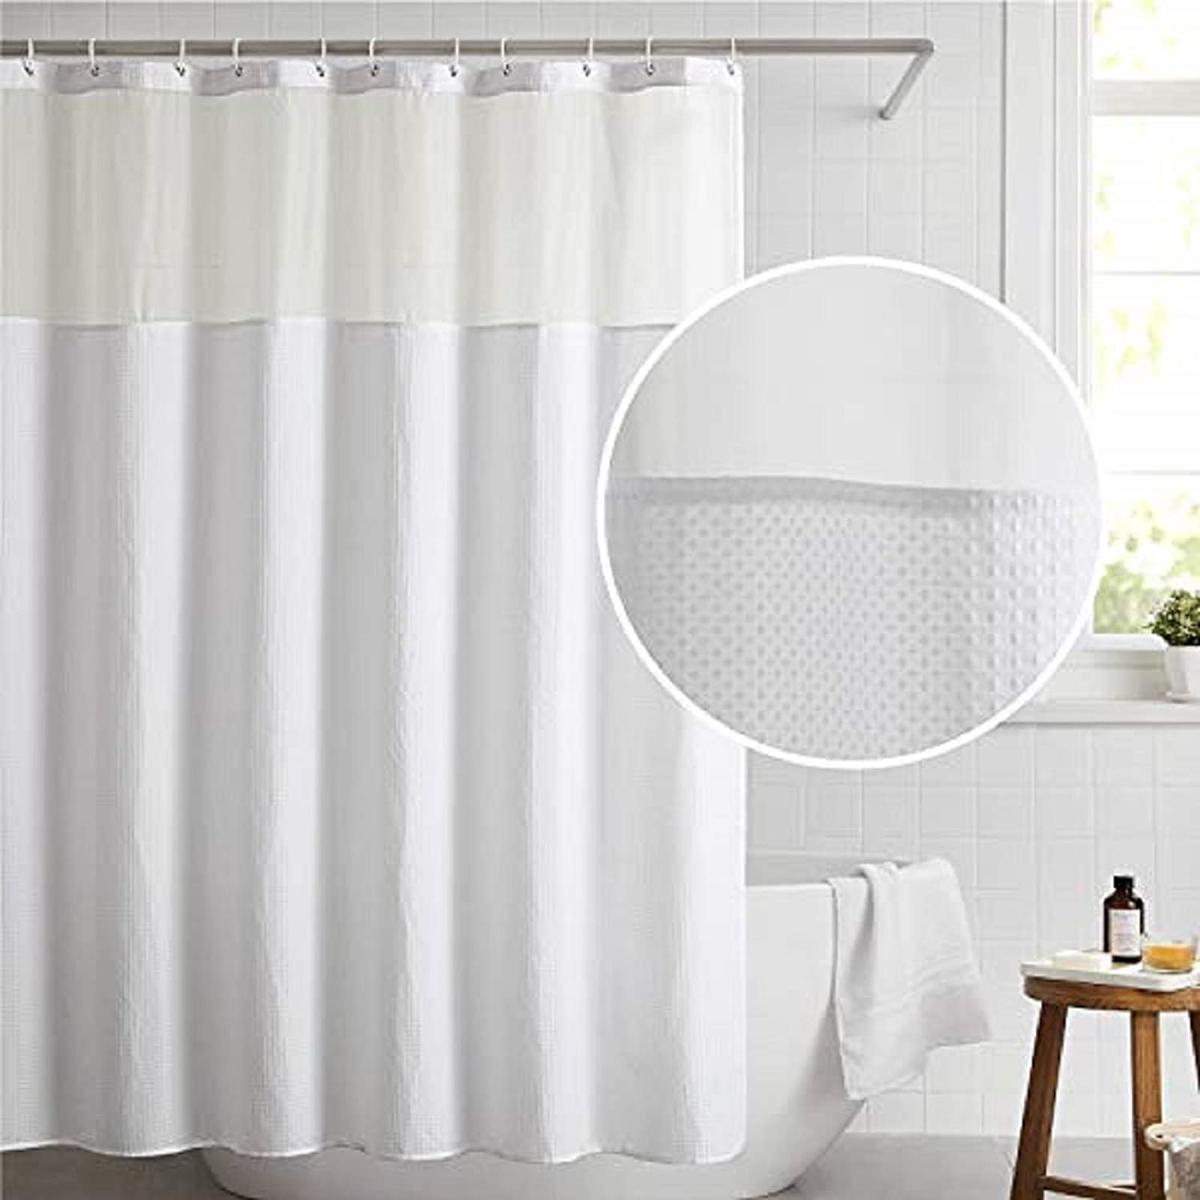 72x72 Bedsure Waffle Weave Fabric Shower Curtain for $19.99